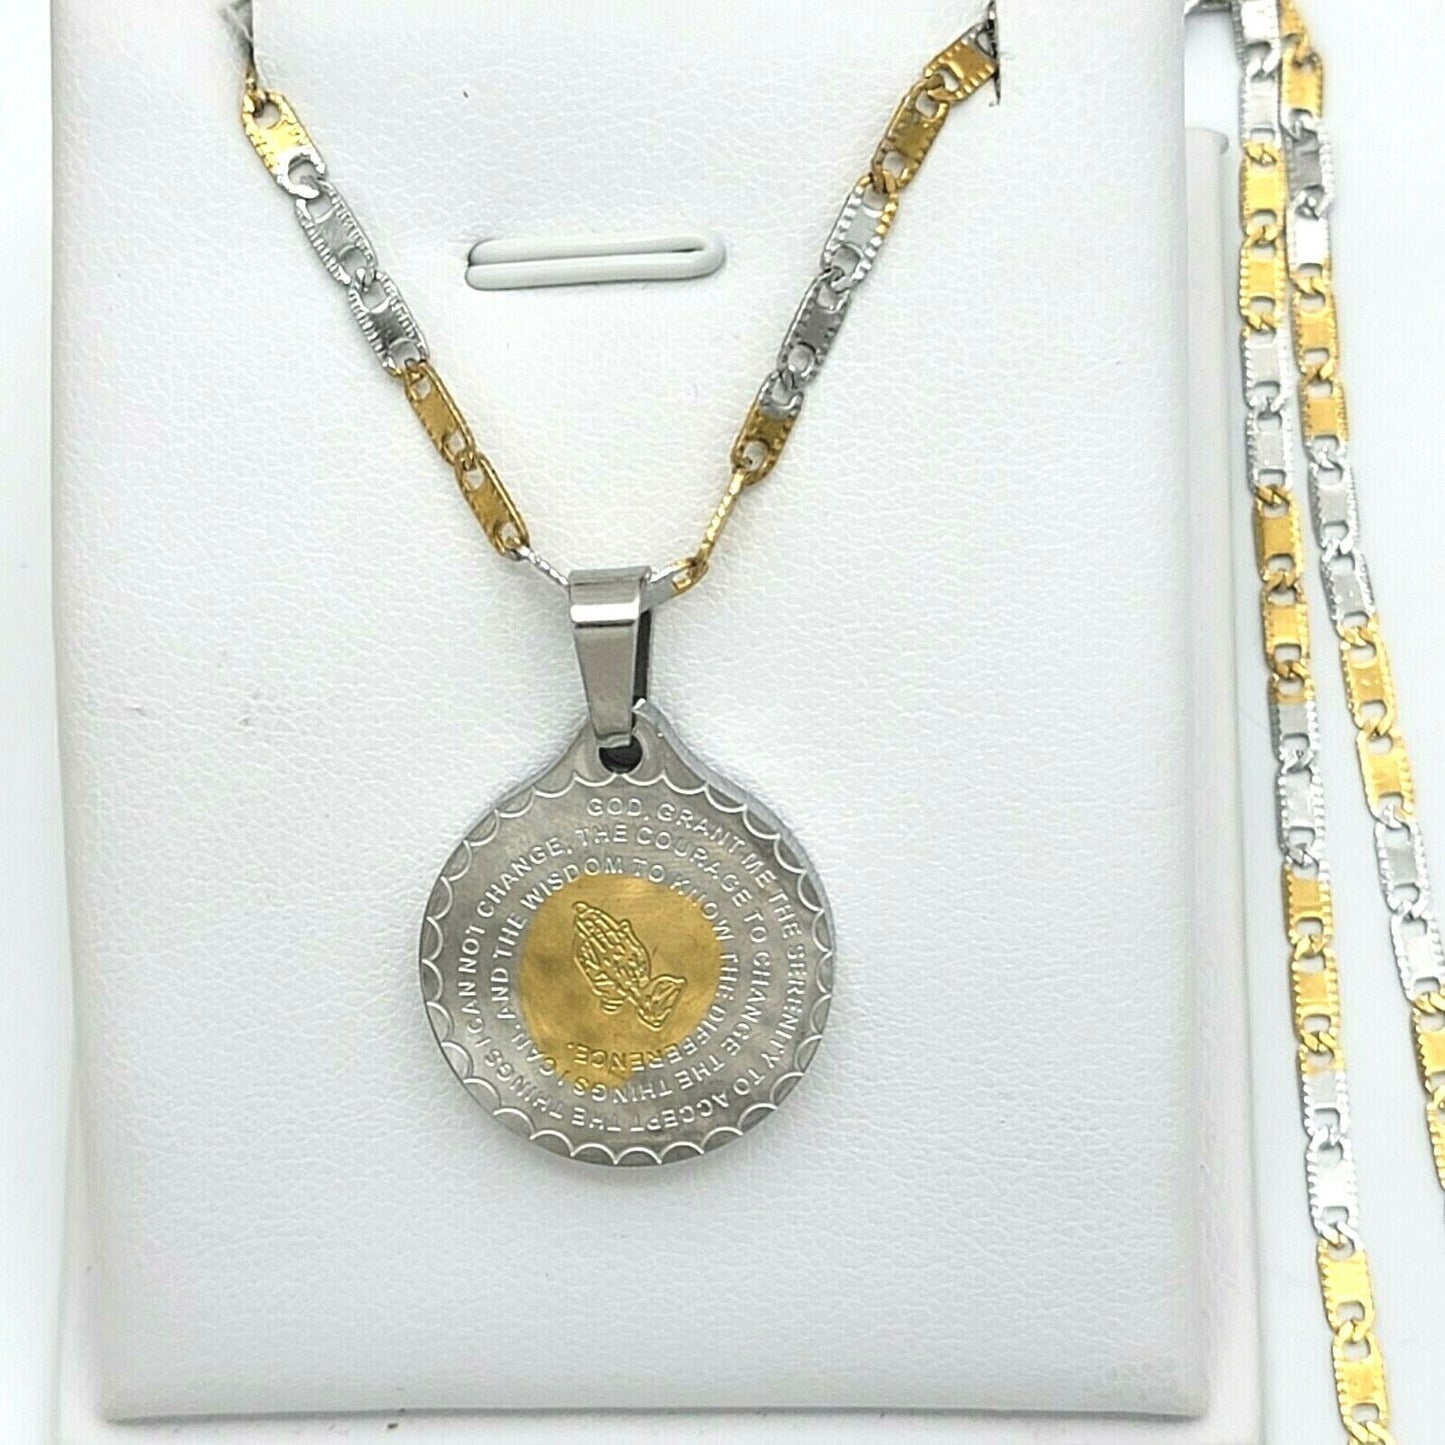 Necklaces - Stainless Steel Gold Plated. Serenity Prayer Medallion & Chain.